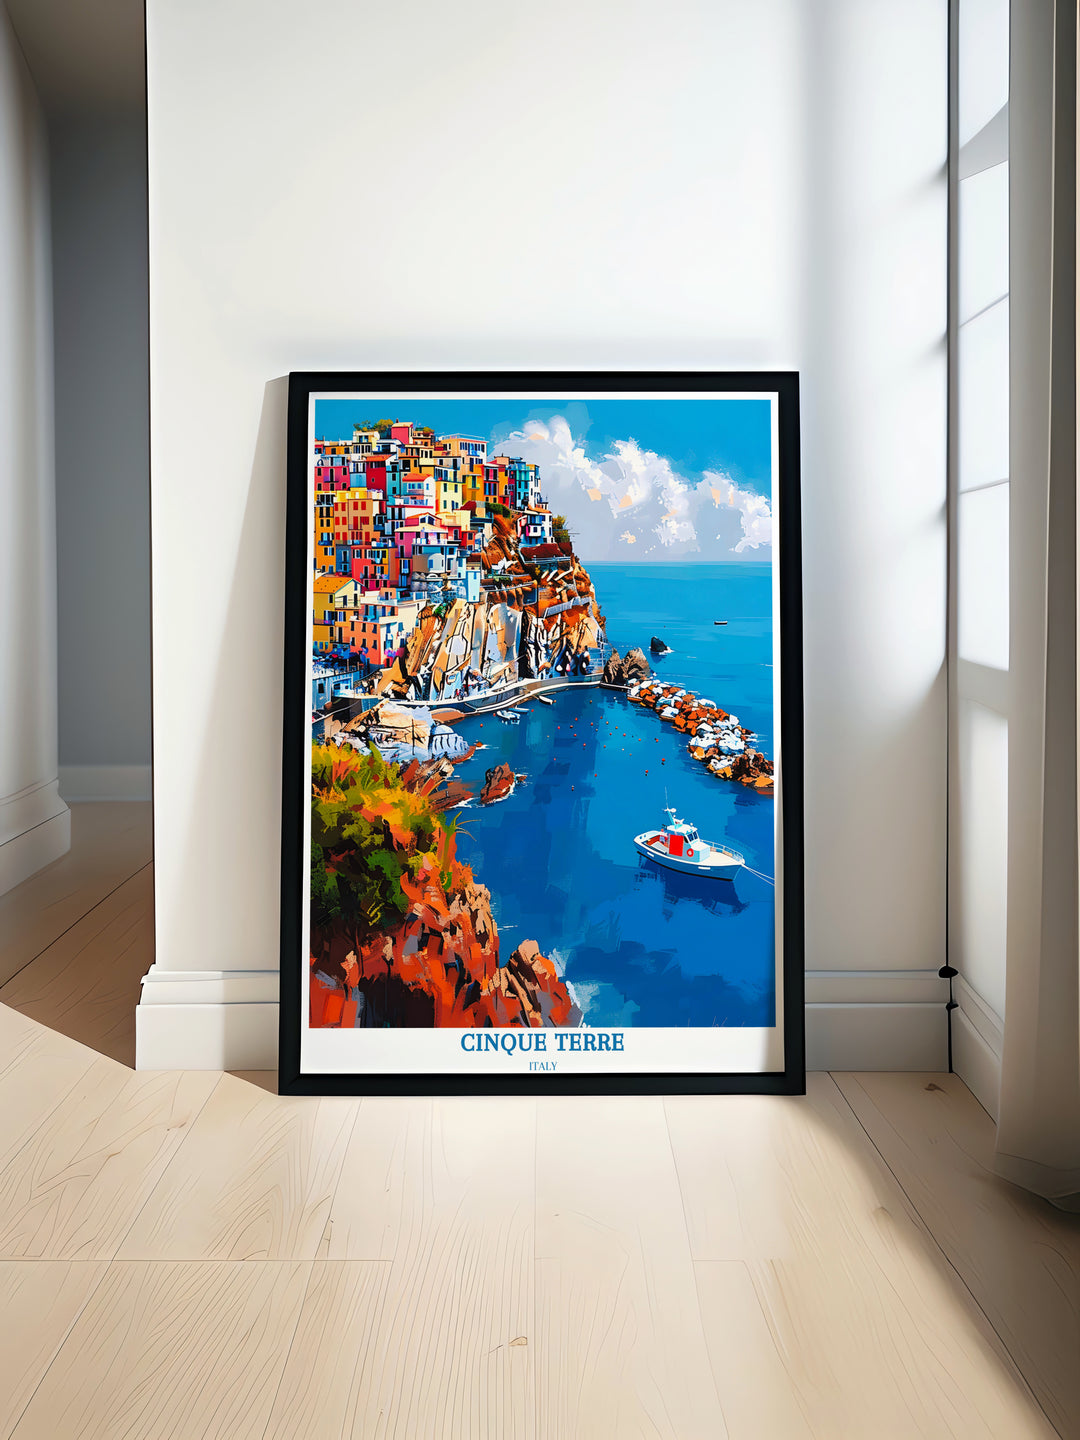 Artistic representation of Manarola in an oil painting emphasizing the harmonious blend of nature and architecture in Cinque Terre making it a sought-after piece for Italy enthusiasts